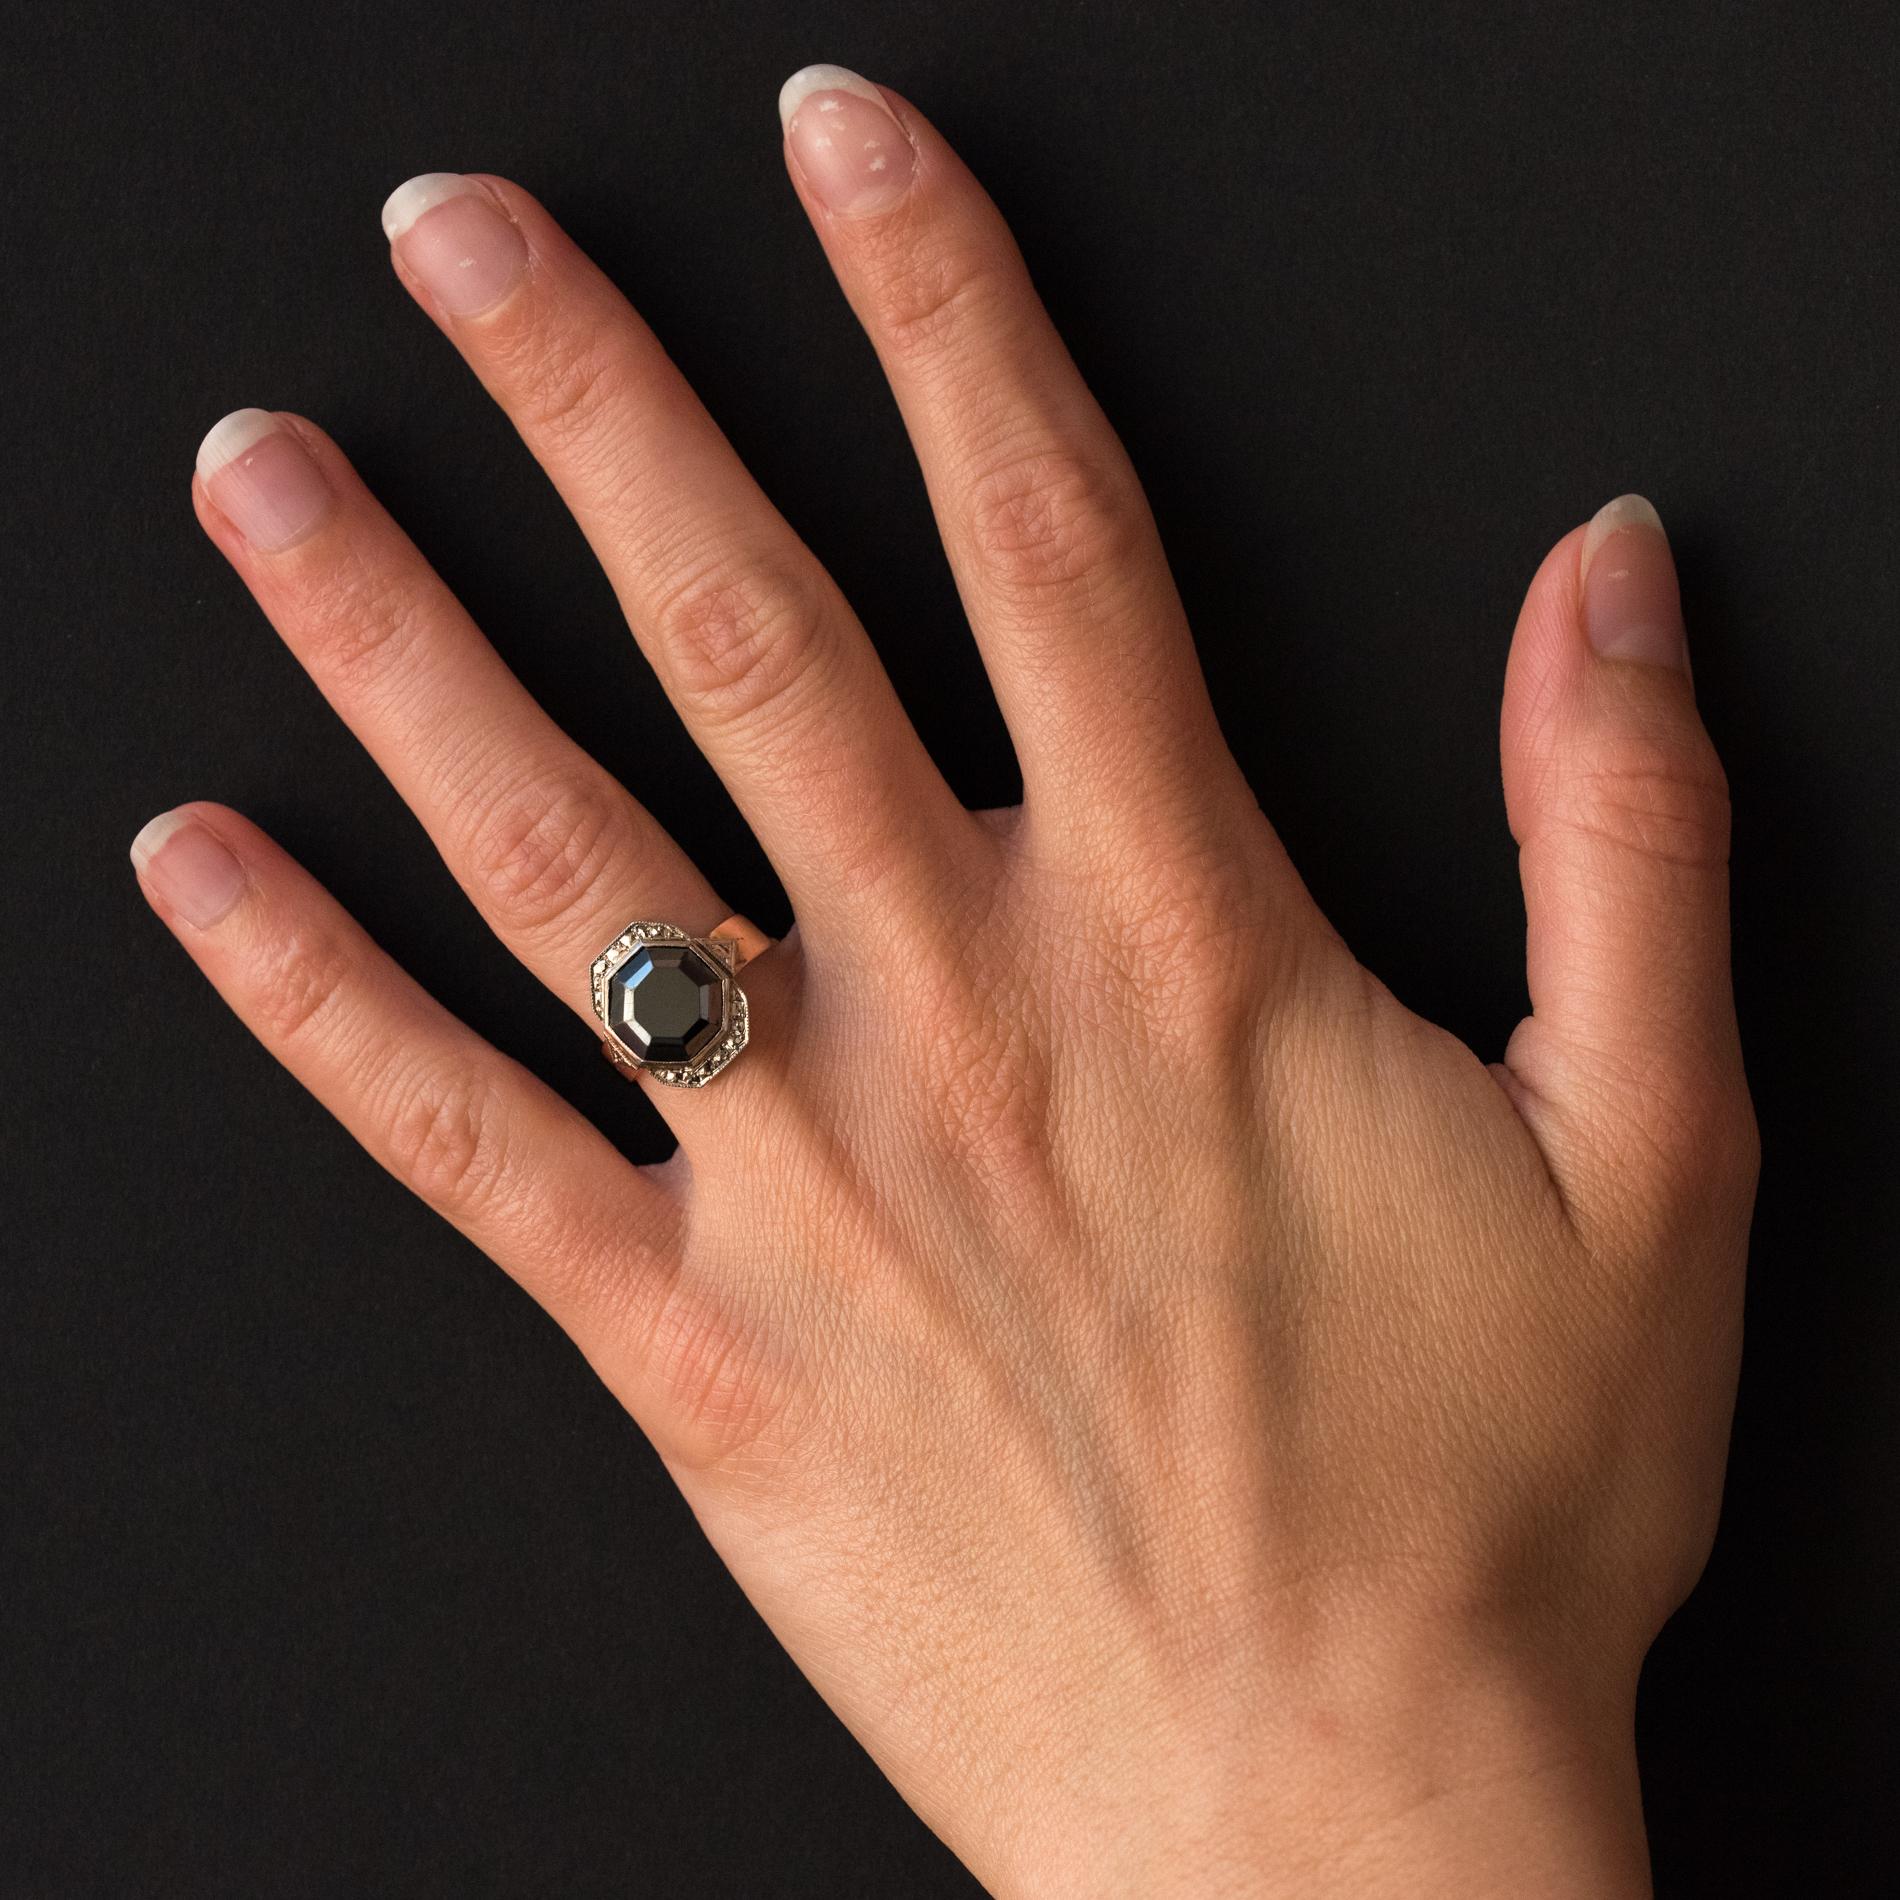 Ring in 18 karat rose gold.
Lovely antique ring, it is closed set in the center of an octagonal hematite surrounded by a chiseled decoration imitating diamonds. On both sides, the start of the ring is adorned with two chiseled triangular